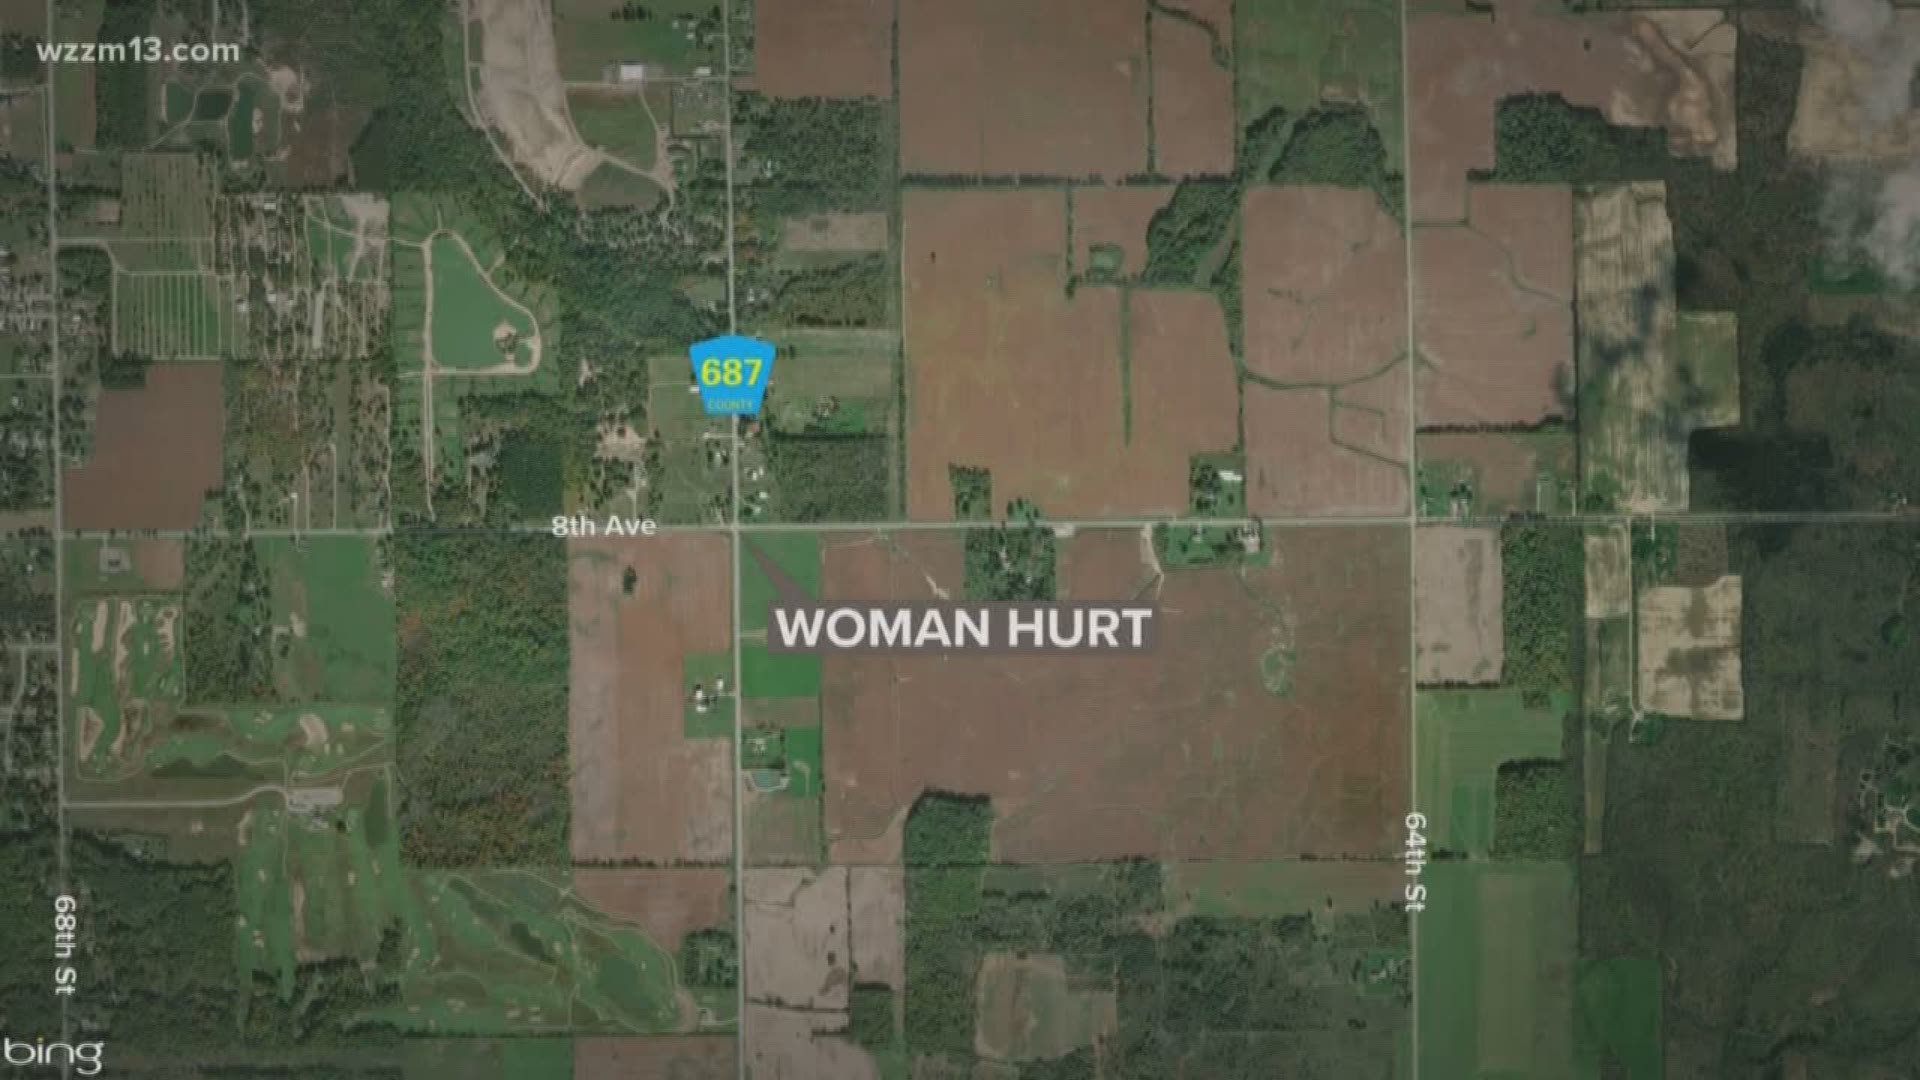 A 27-year-old South Haven woman is in the hospital with serious injures after police say she jumped from a moving vehicle.